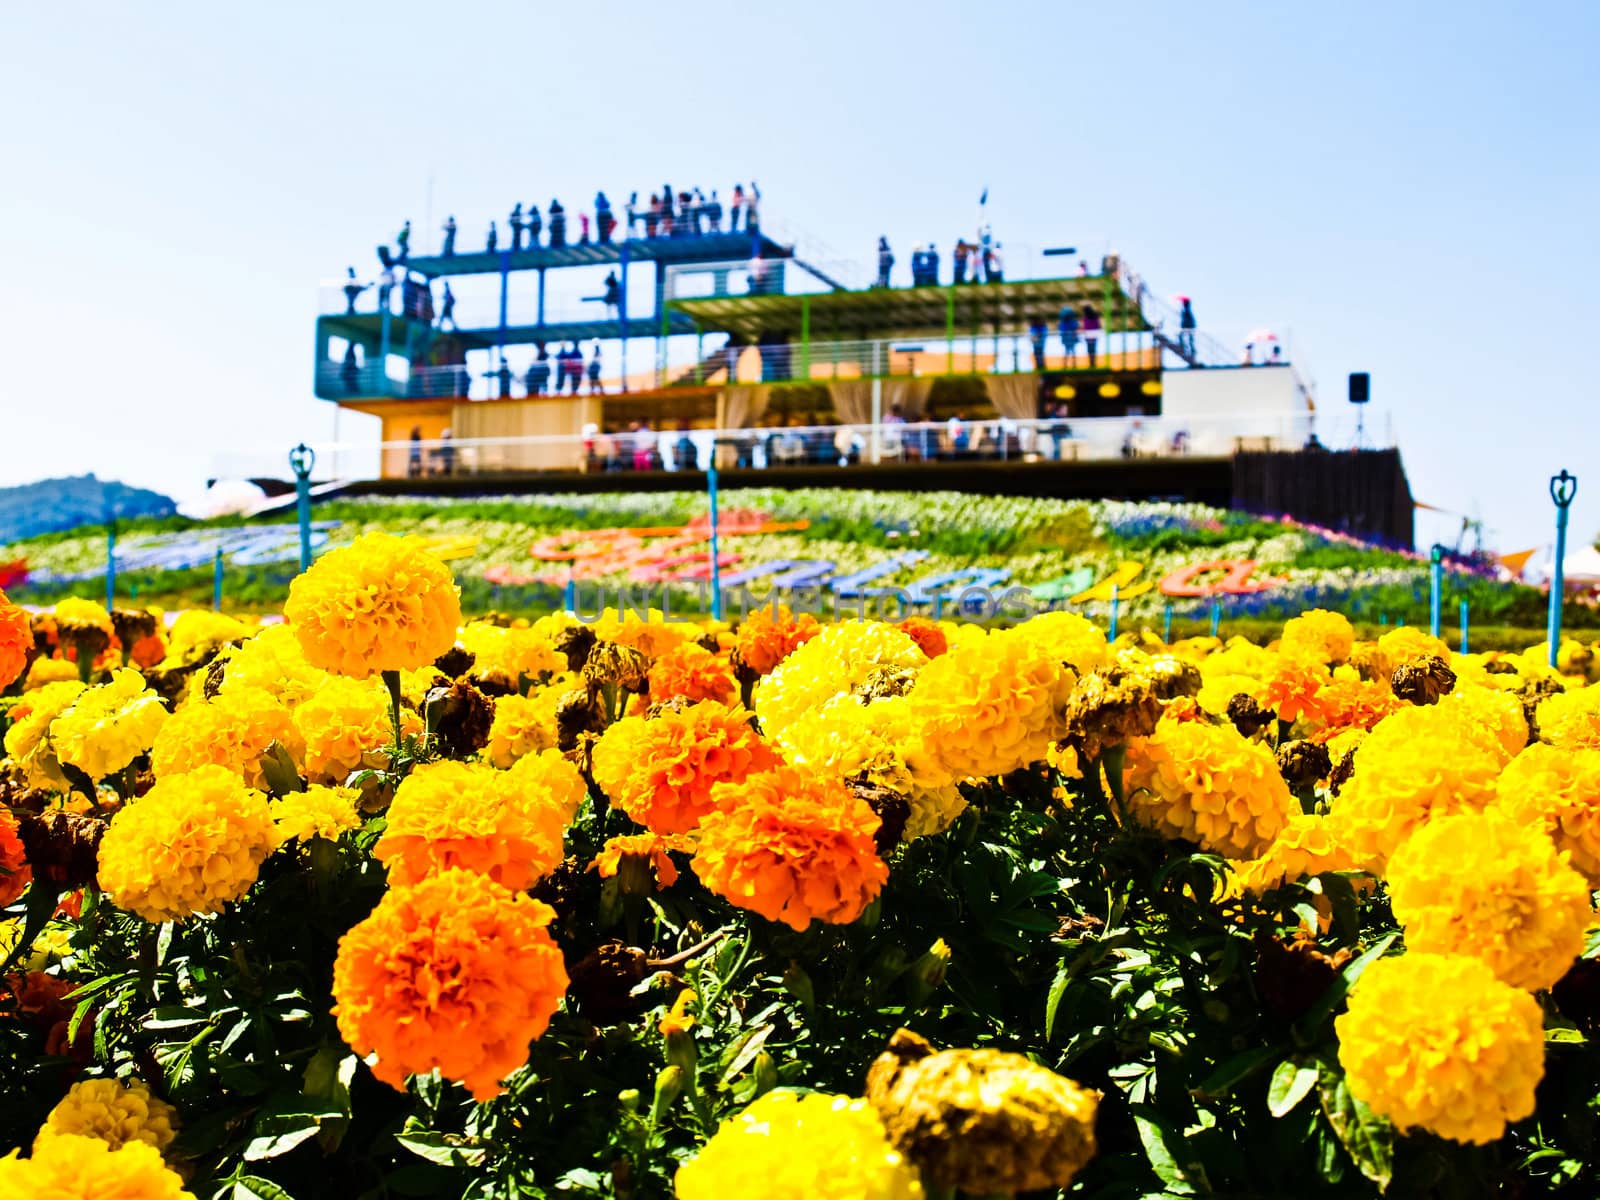 Marigold flower (Tagetes patula L.) garden with the building background